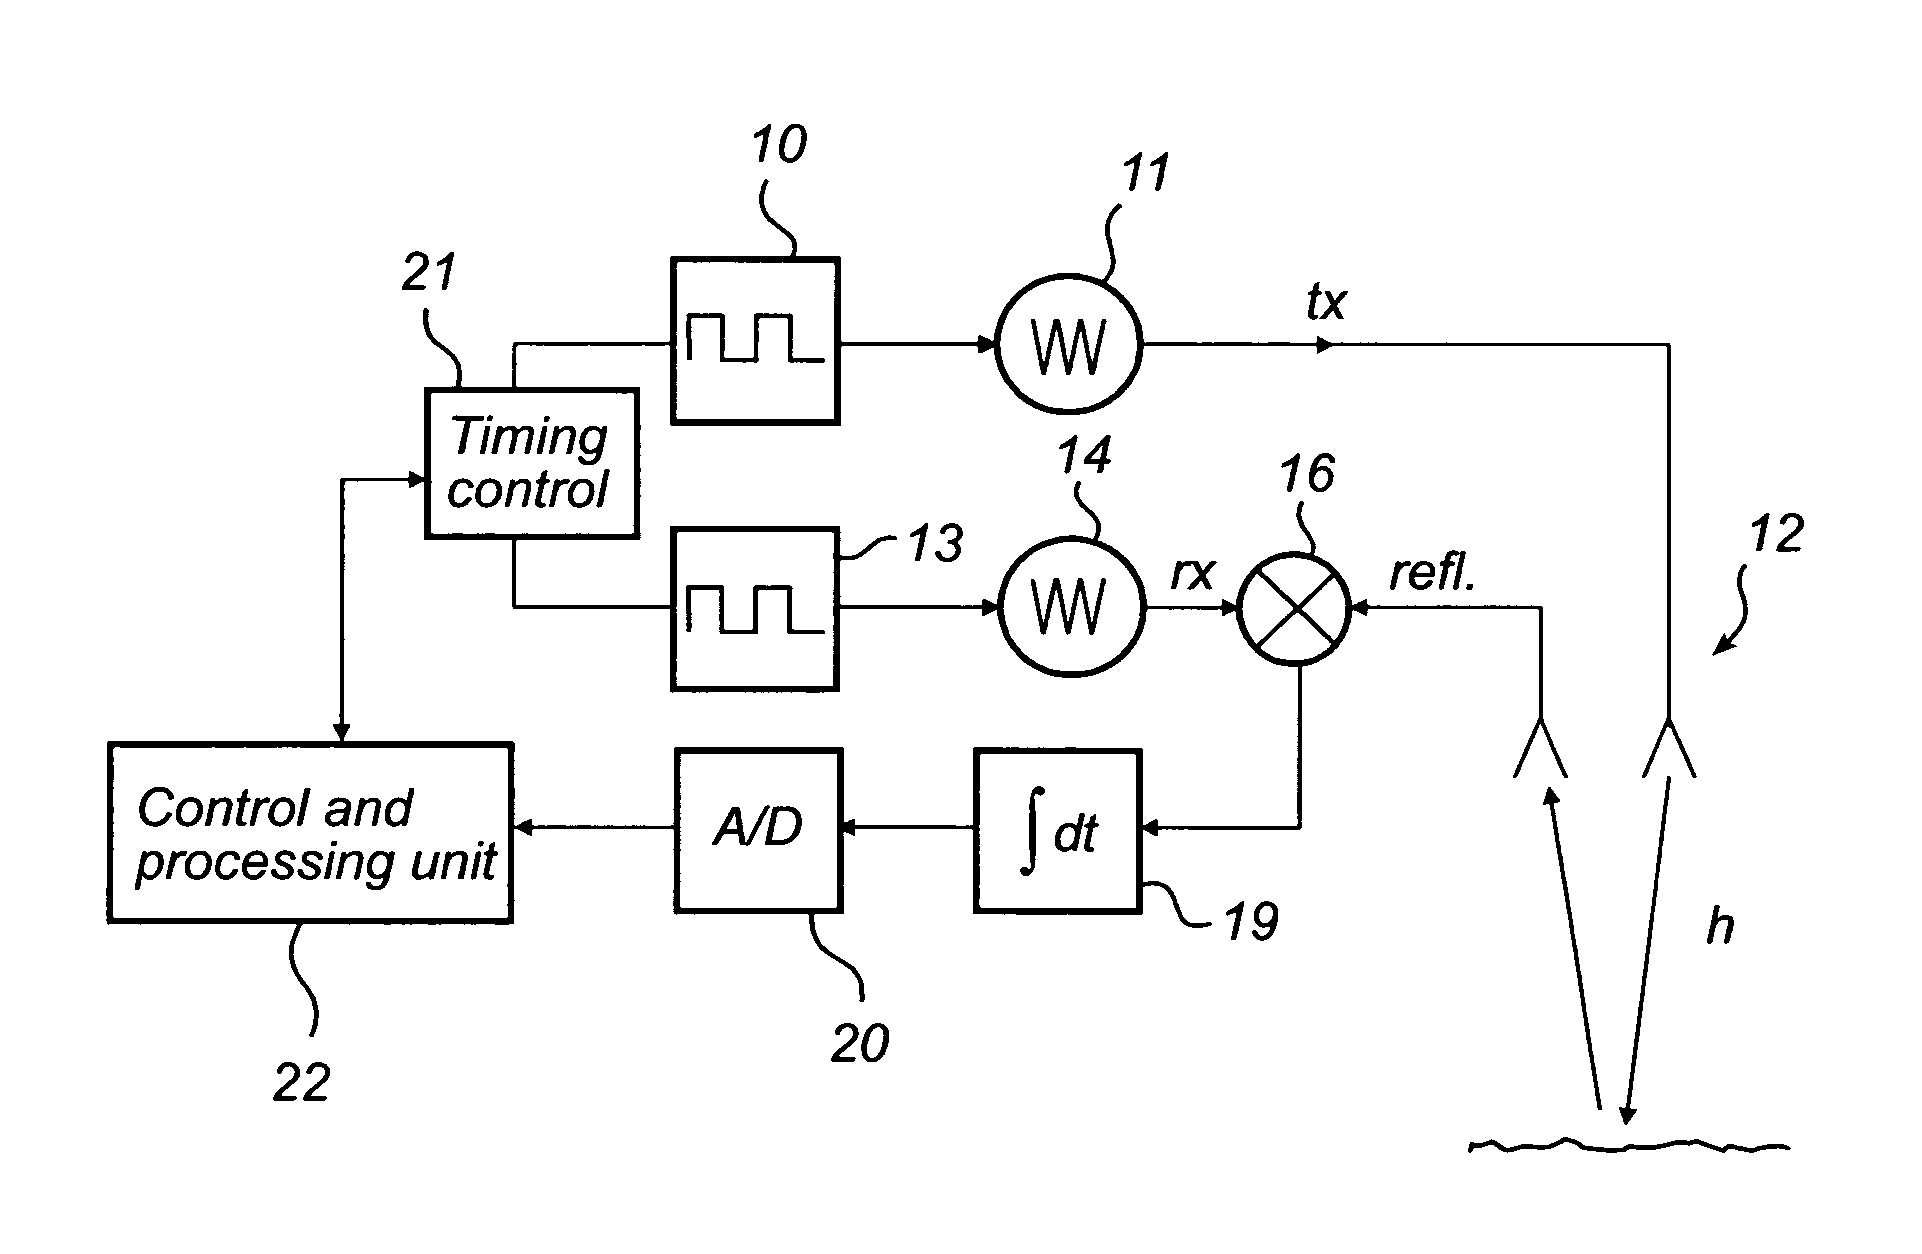 Pulsed radar level gauging with relative phase detection